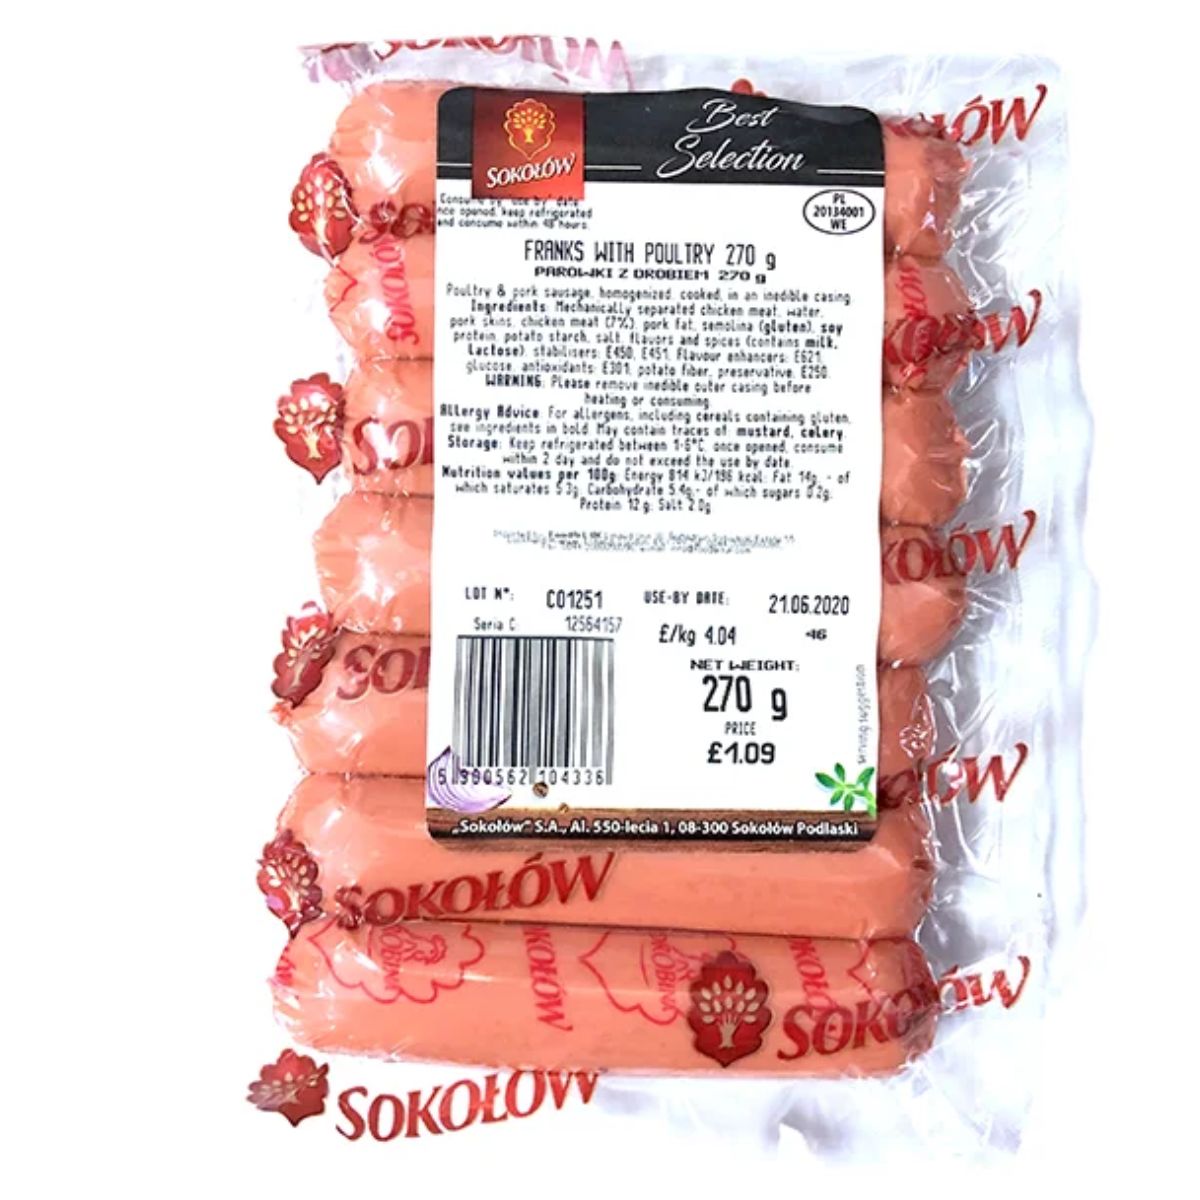 A package of Sokolow - Franks with Poultry - 270g on a white background.